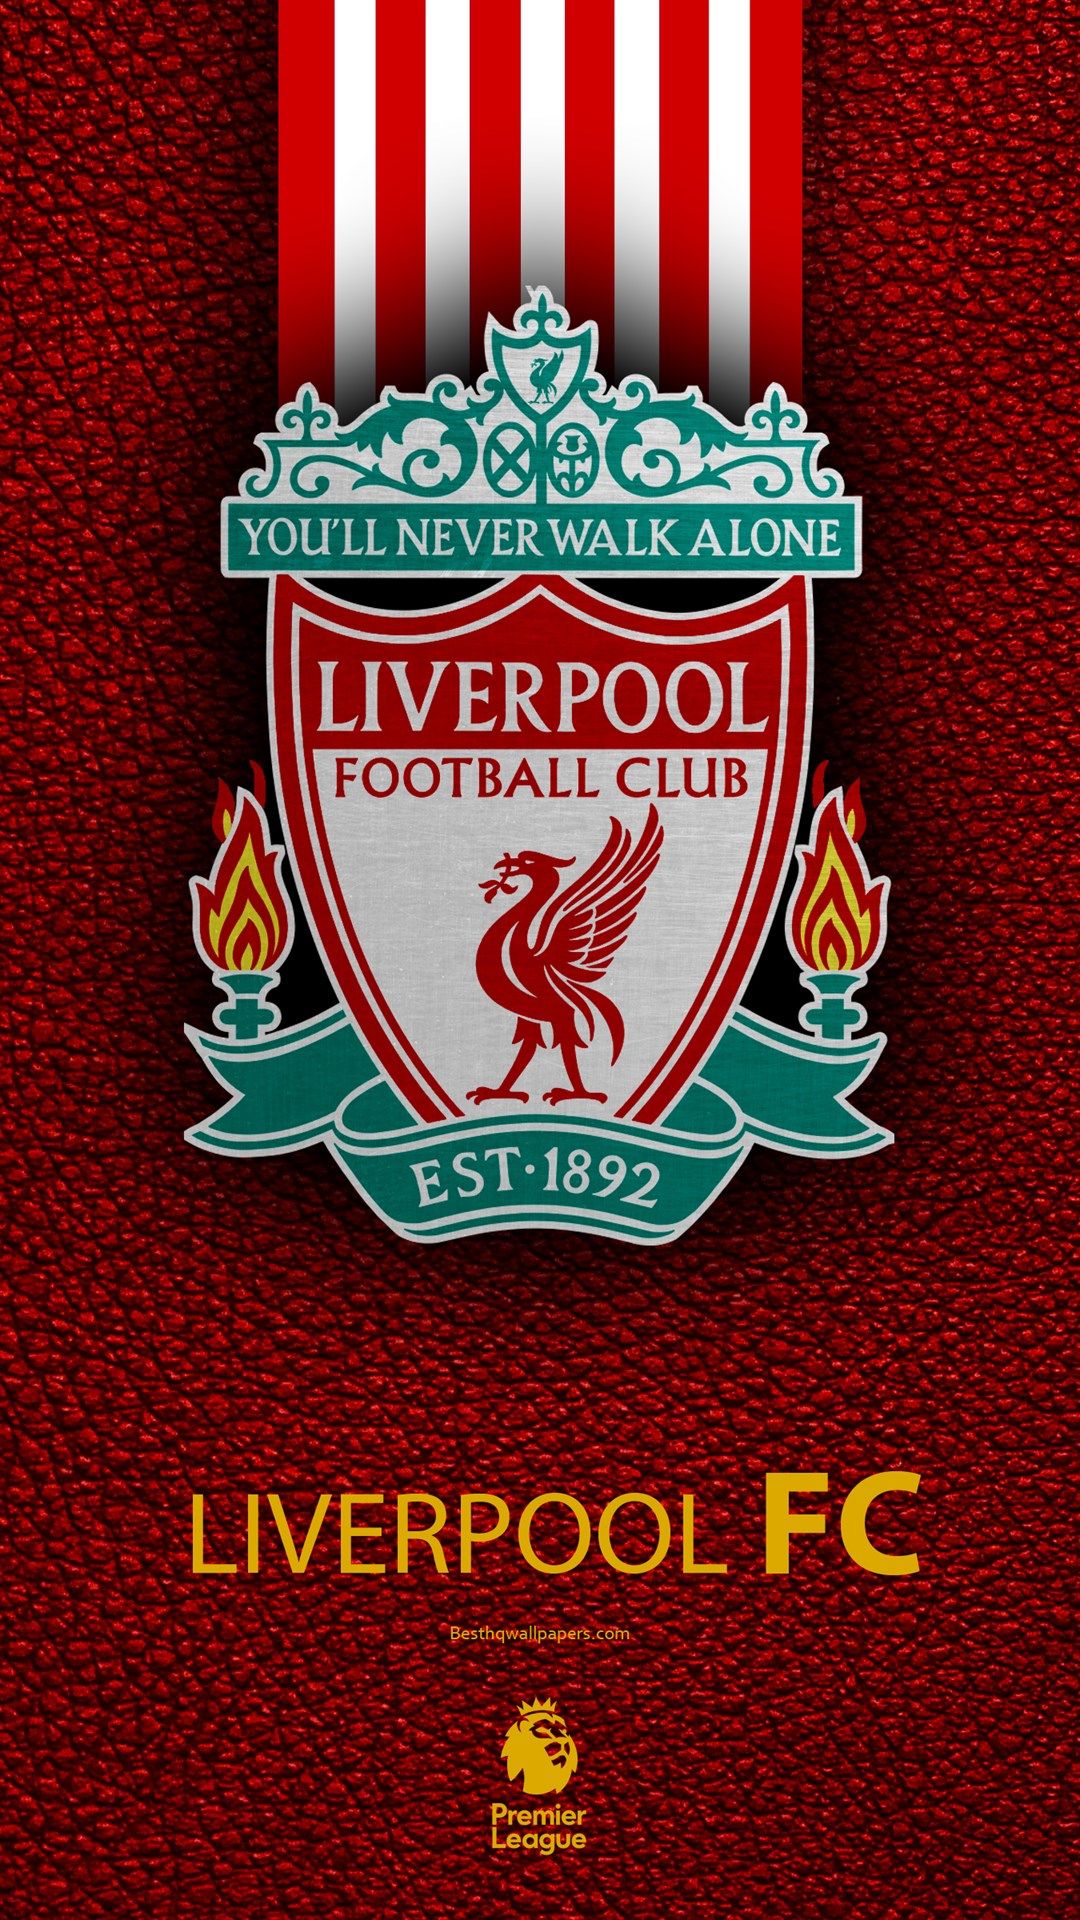 1080x1920, club, Desktop, Download, emblem, England, English, Football, High, Kingdom, League, leather, Liverpool, Liverpool FC Wallpapers 4k, Logo, pictures, Premier, Quality, Resolution, texture, United, wallpapers - Liverpool Legends in 4K Glory wallpapers logo Png